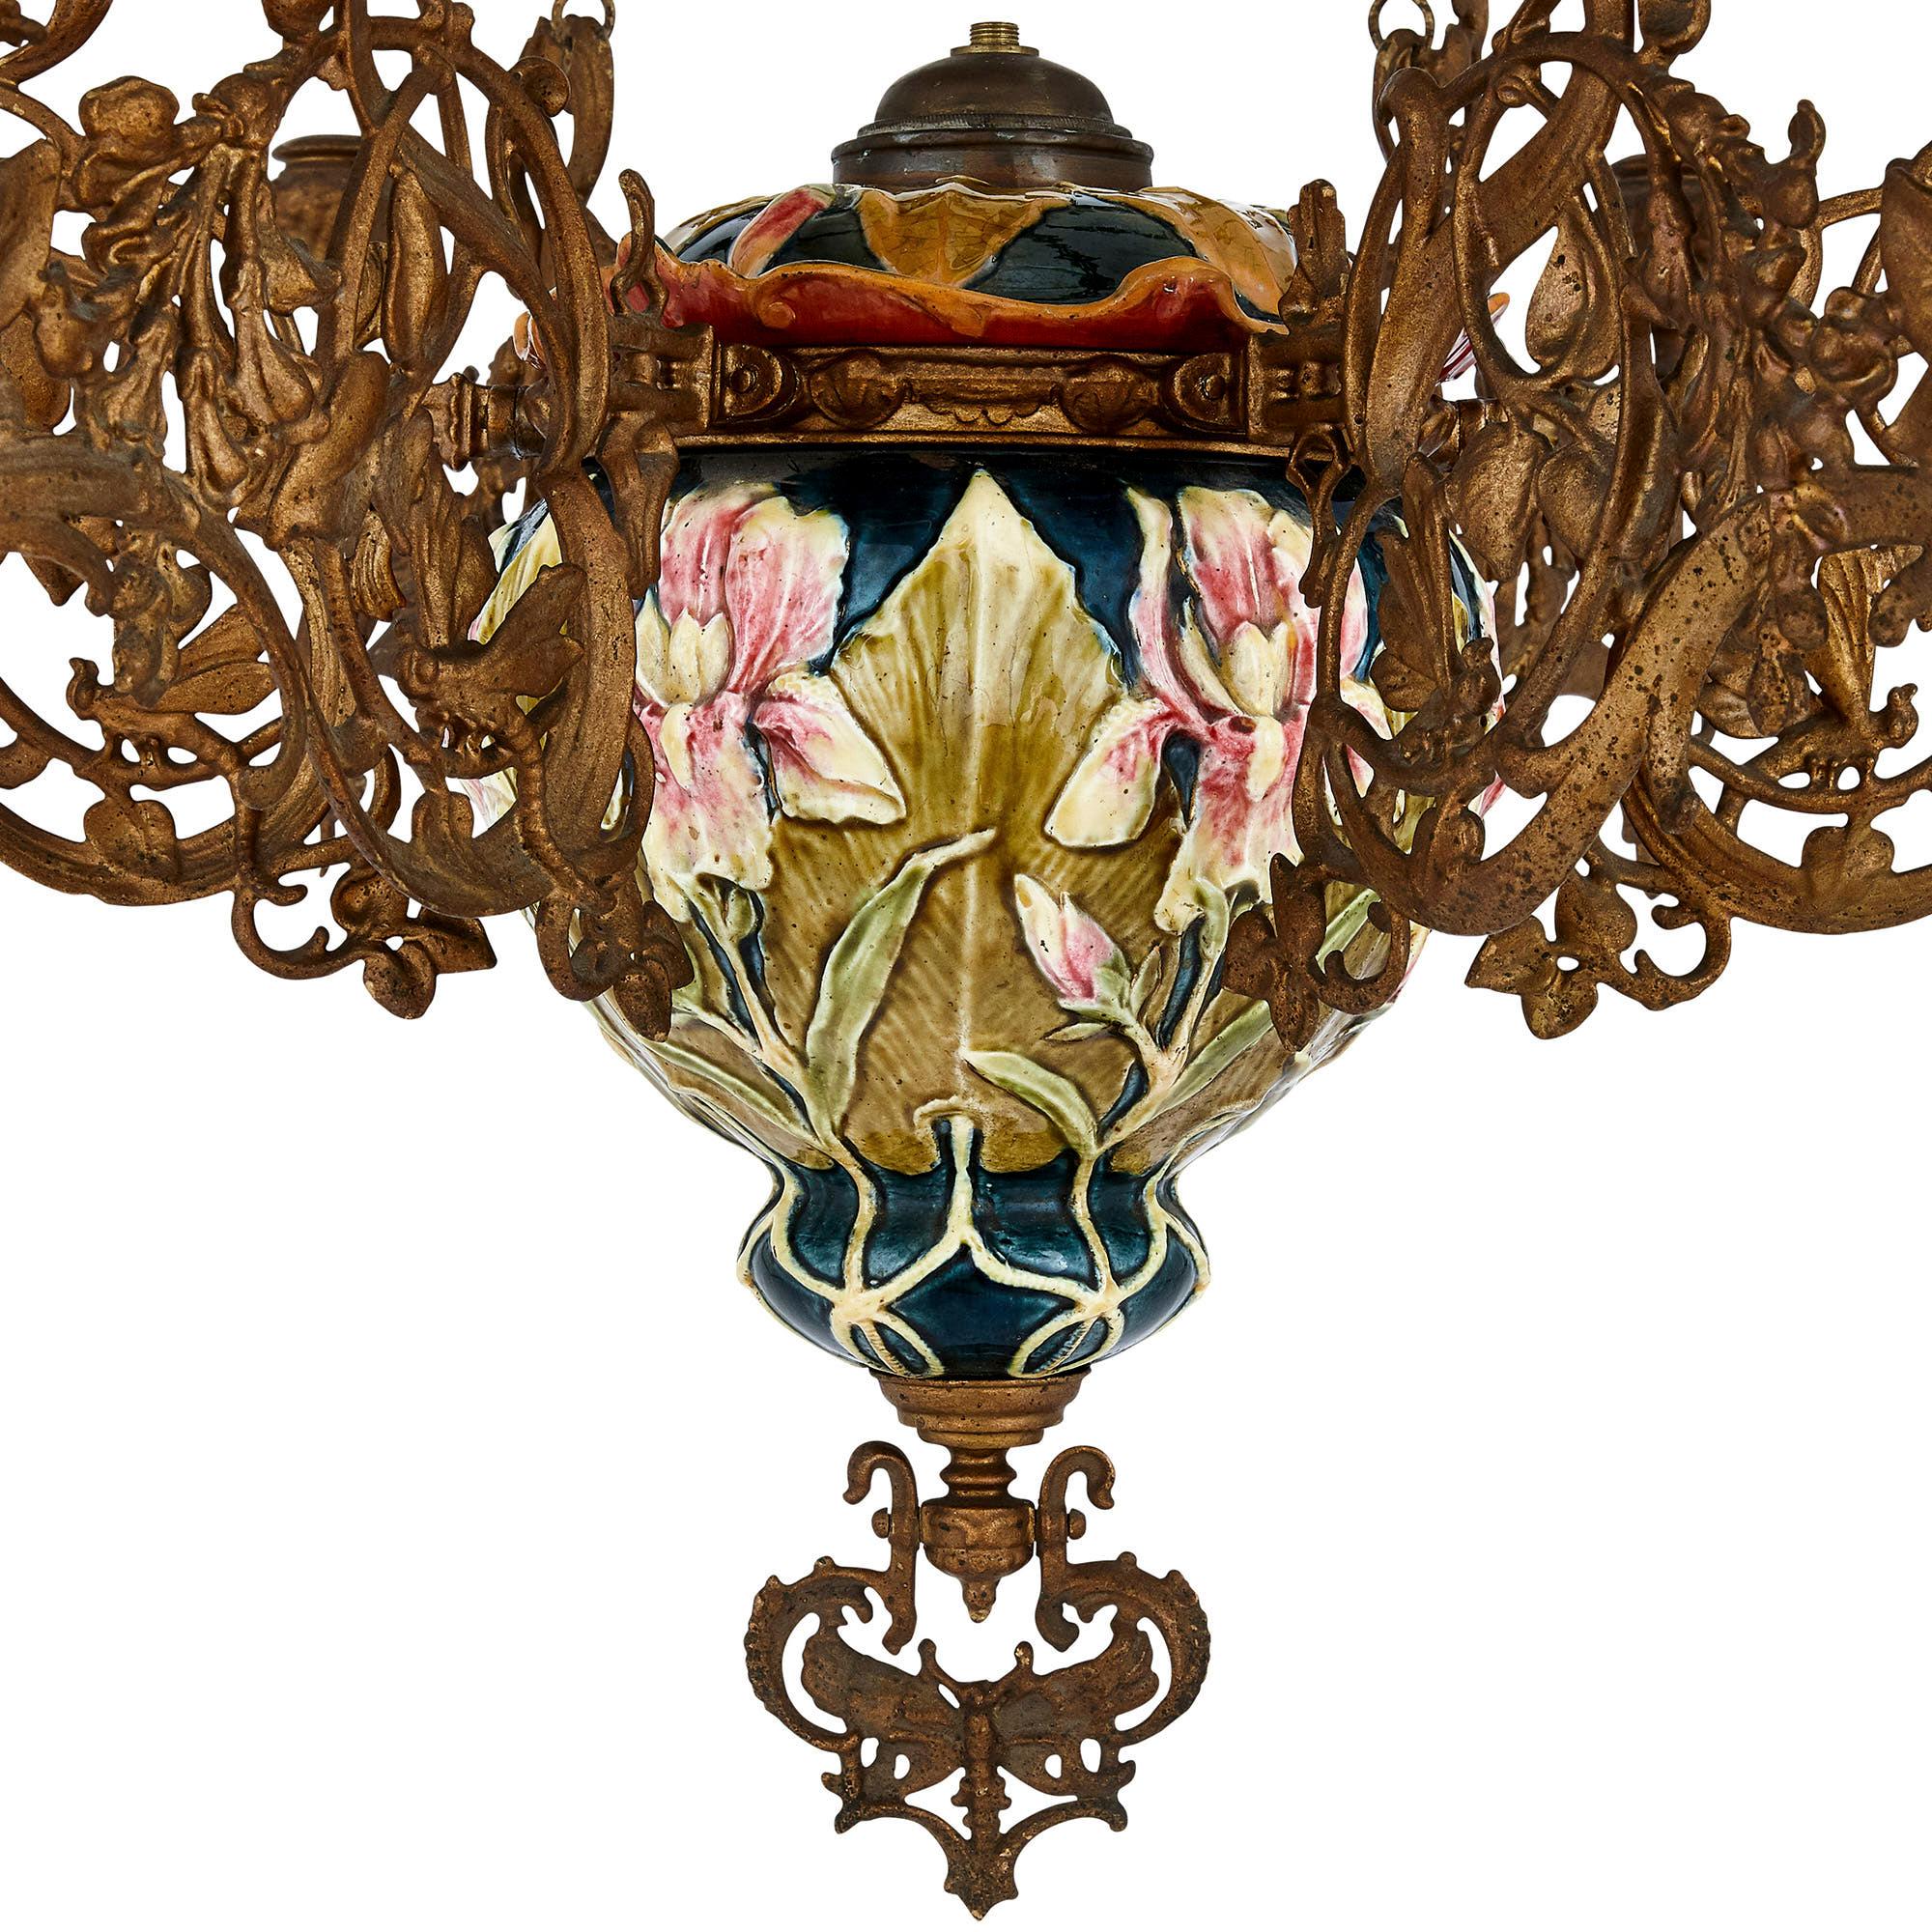 Aesthetic Movement spelter and majolica six-light chandelier,
French, early 20th century
Height 120cm, diameter 74cm

This beautiful chandelier, which demonstrates some of the taste of the Aesthetic Movement as well as Art Nouveau, is crafted